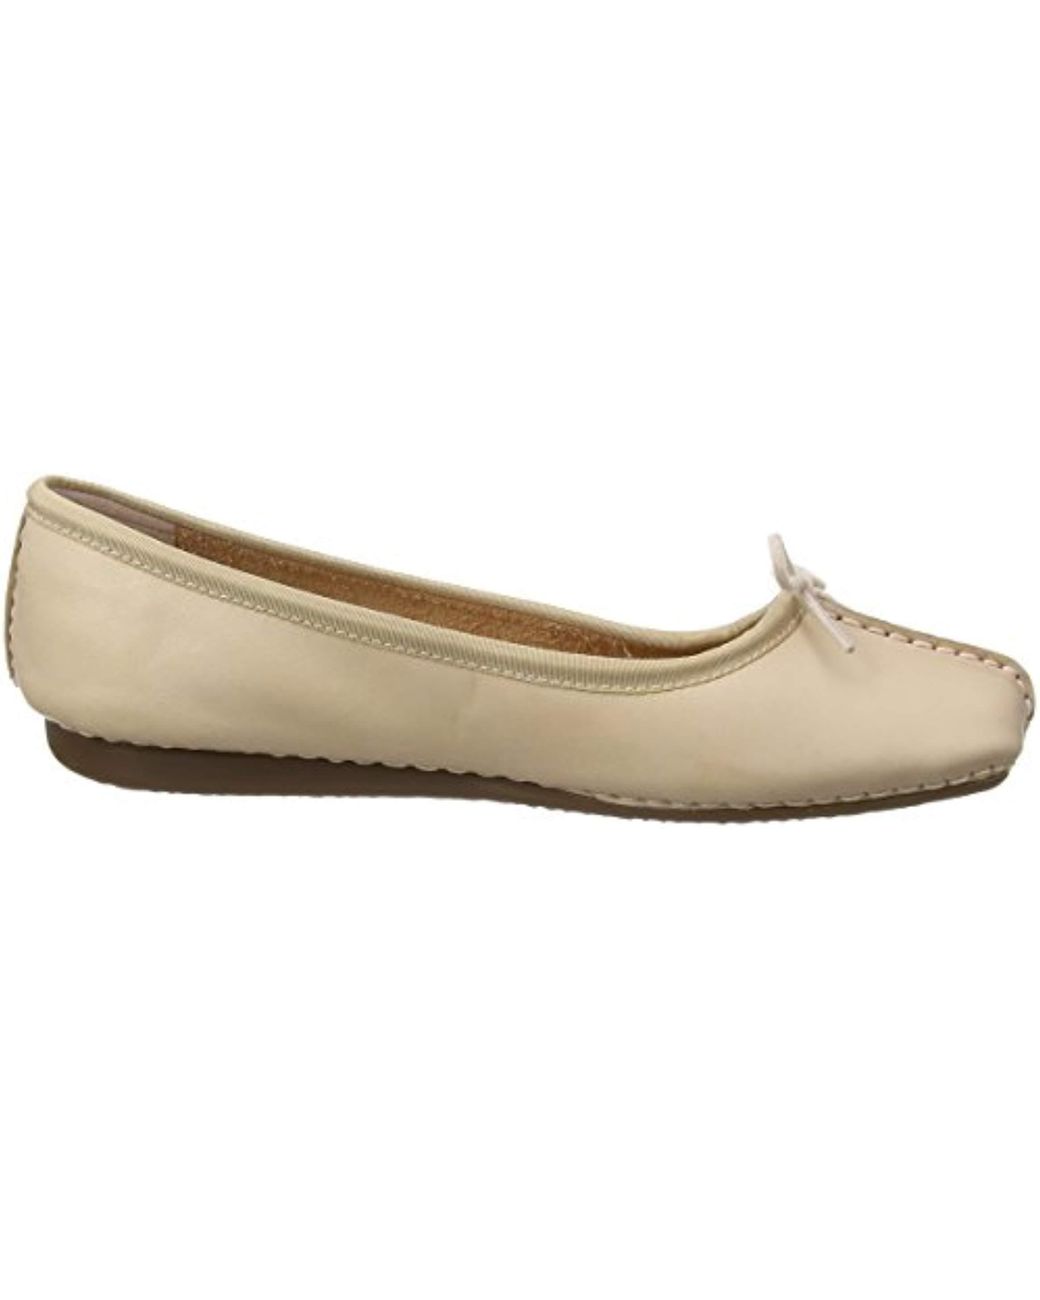 Clarks Leather Freckle Ice Ballet Flats in Beige (Nude) (Natural) | Lyst UK